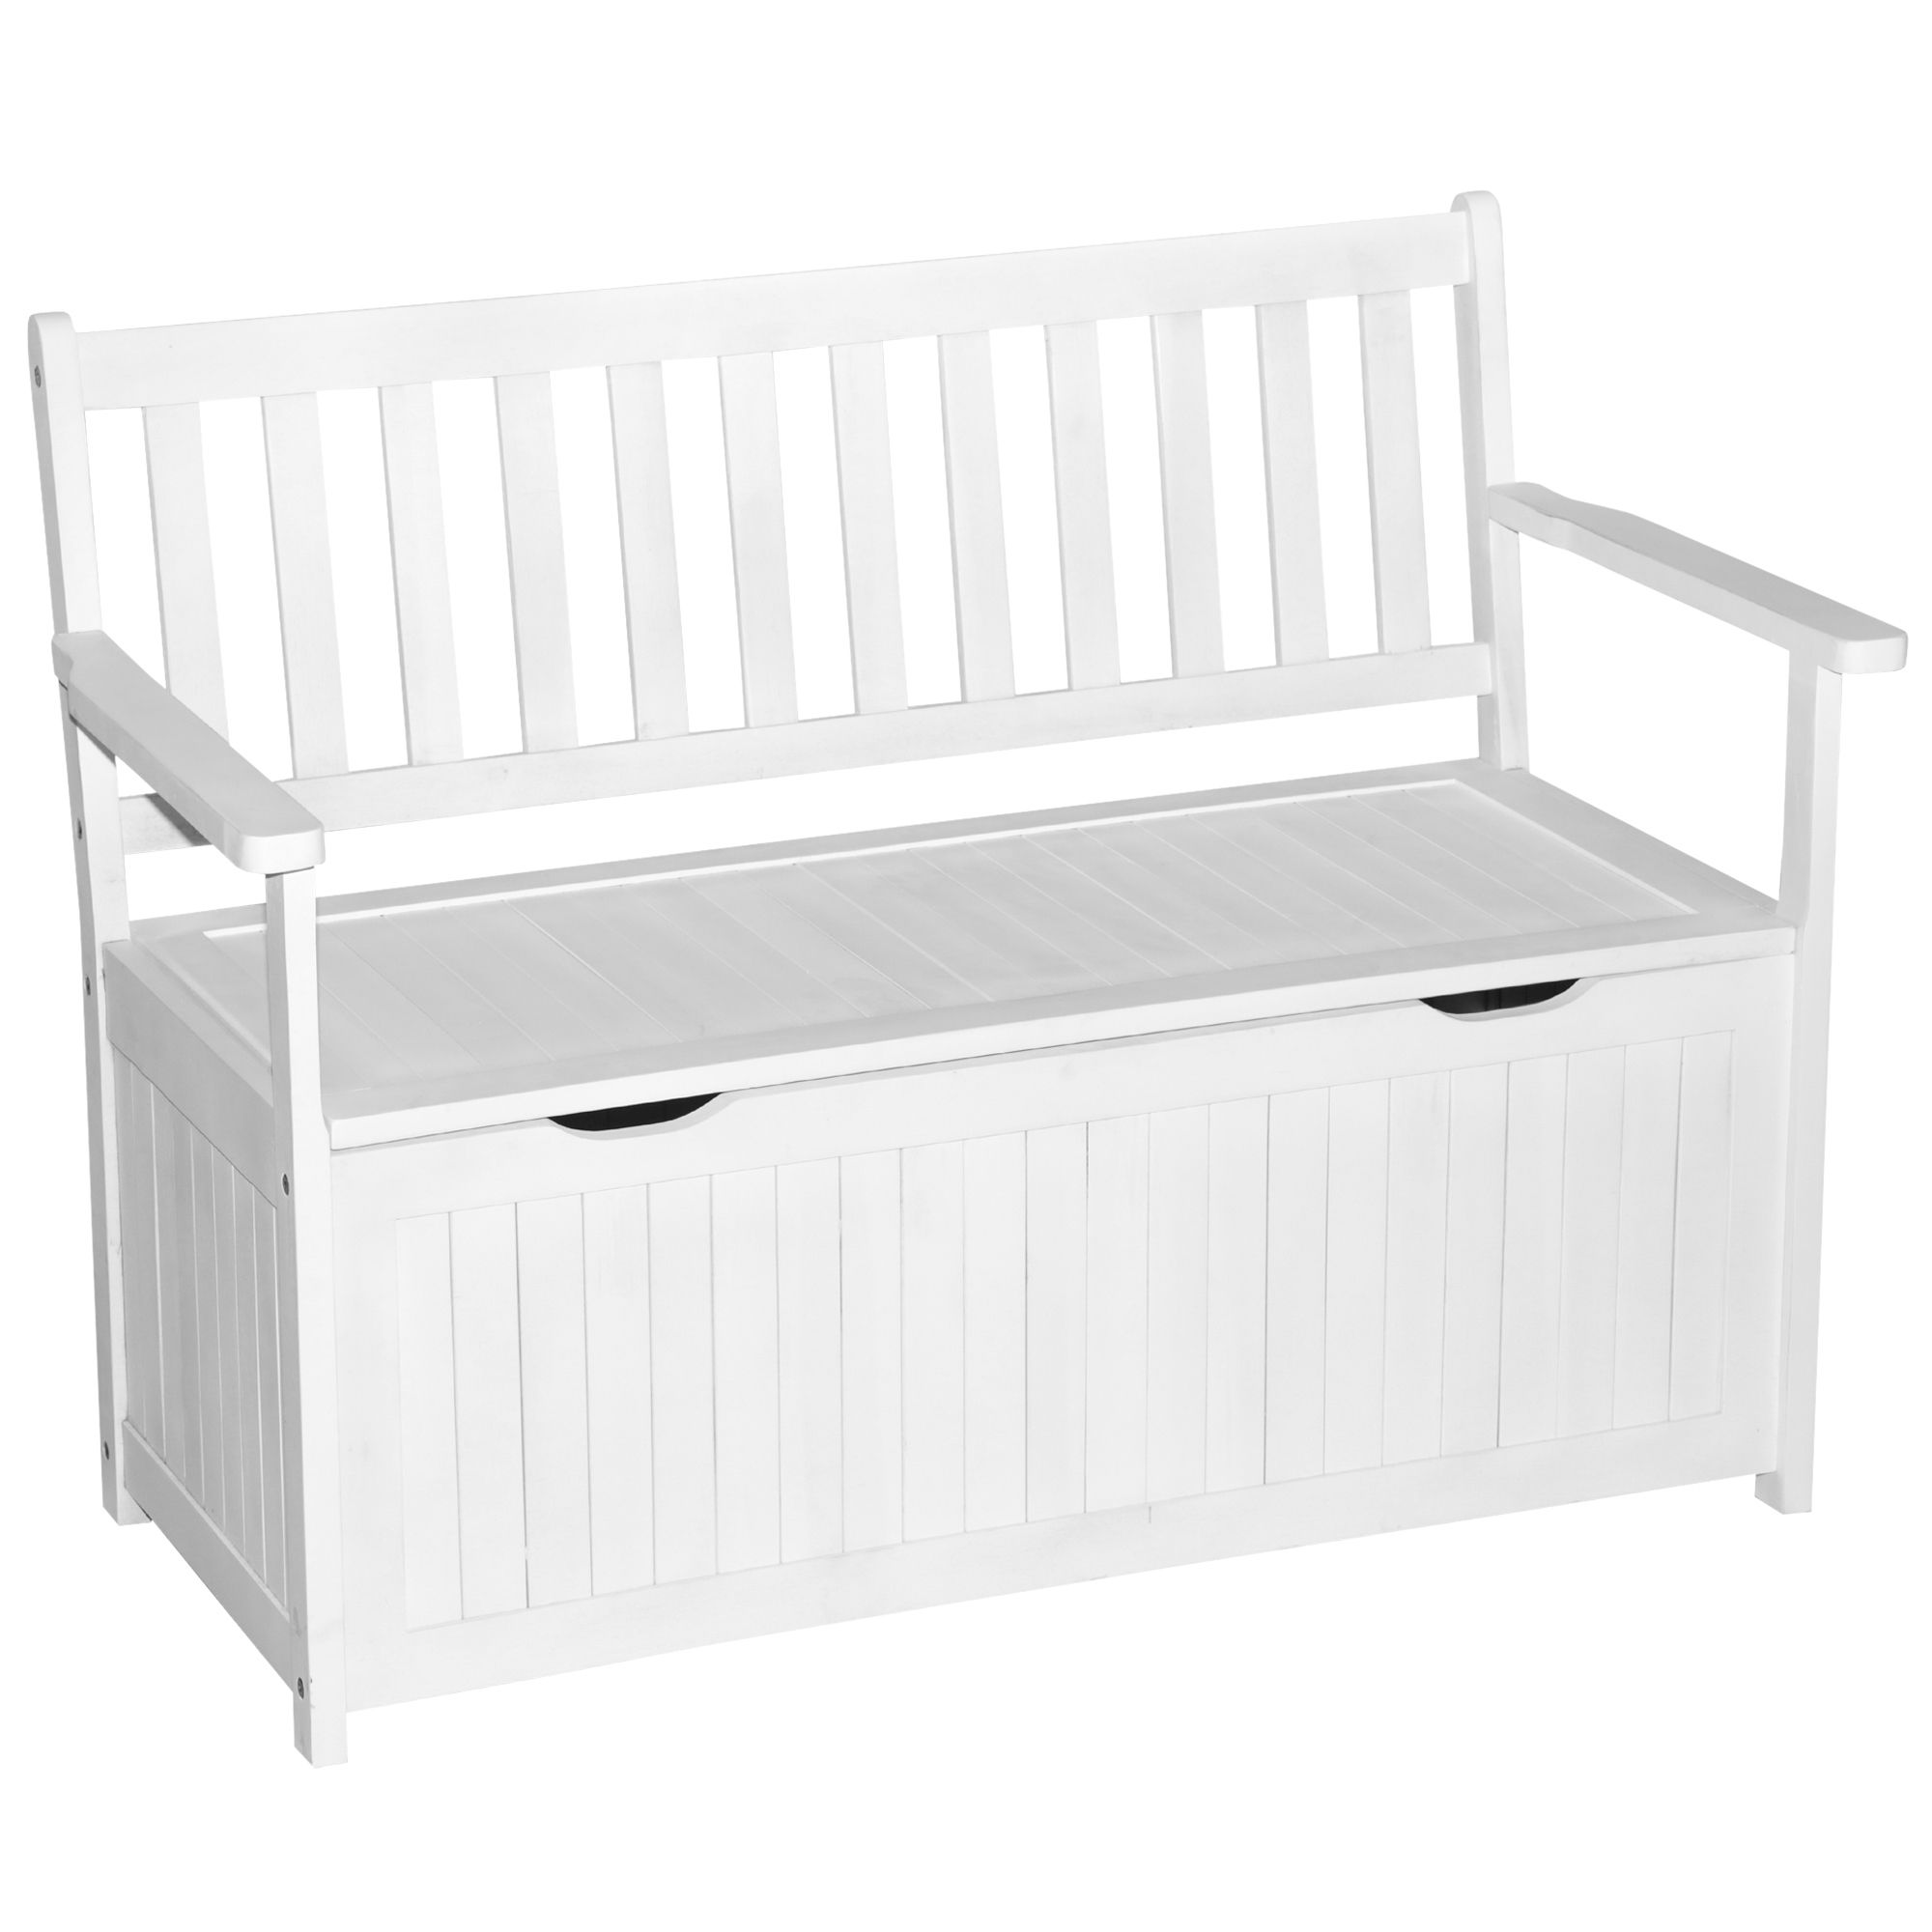 White Storage Outdoor Tables Within Famous Outsunny Outdoor Storage Acacia Wood Bench – White – Walmart (View 6 of 15)